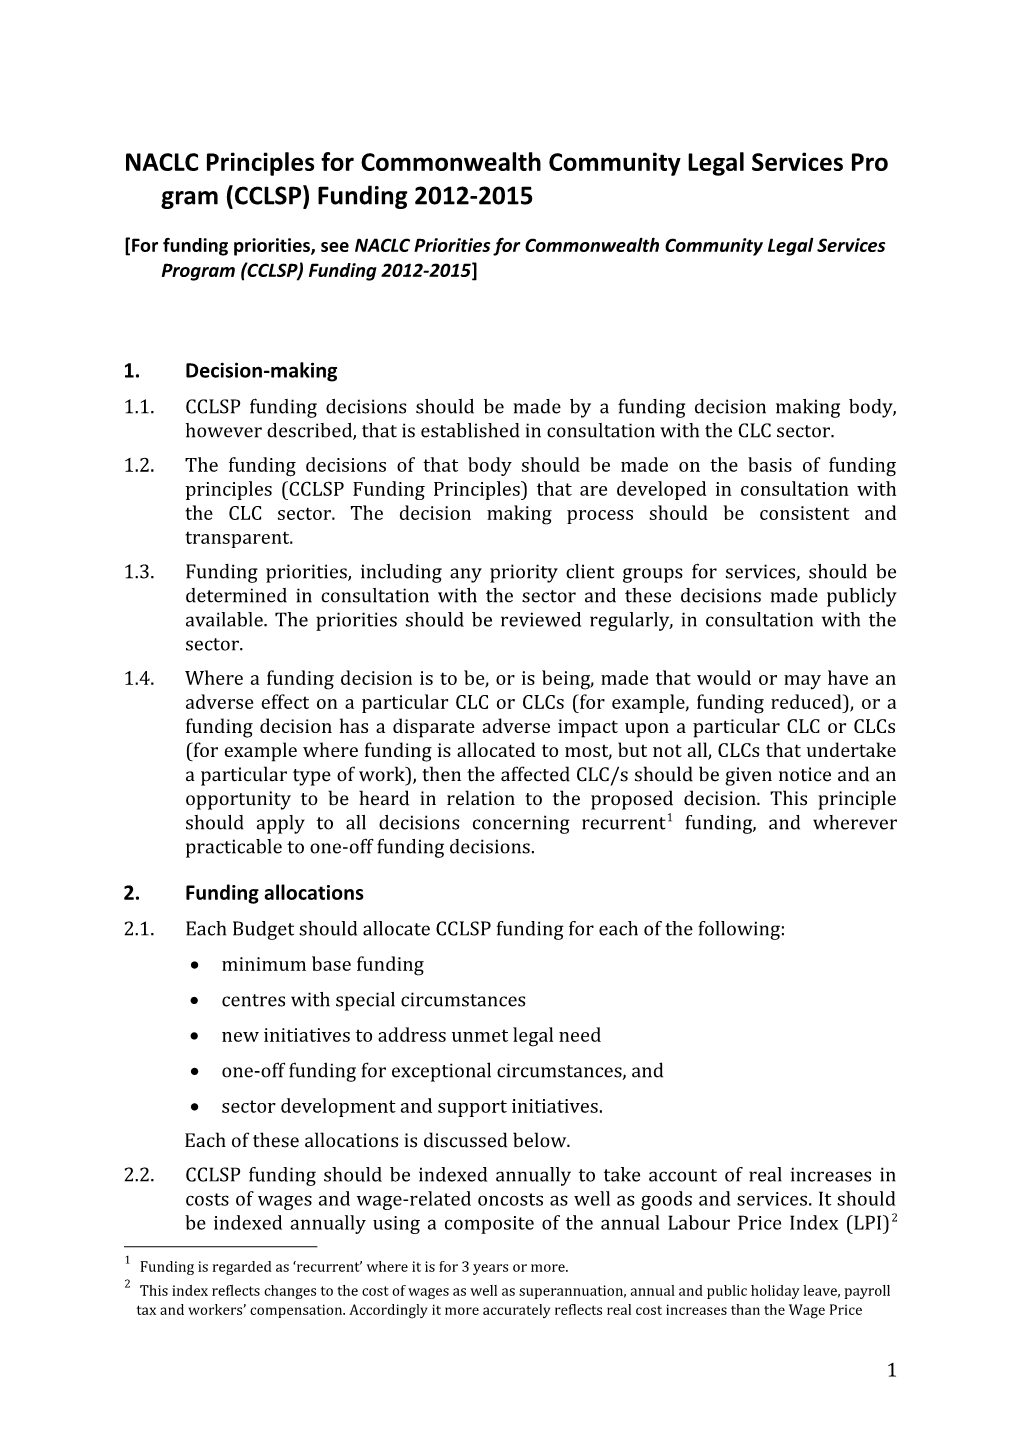 NACLC Principles for Commonwealth Community Legal Services Program (CCLSP) Funding 2012-2015